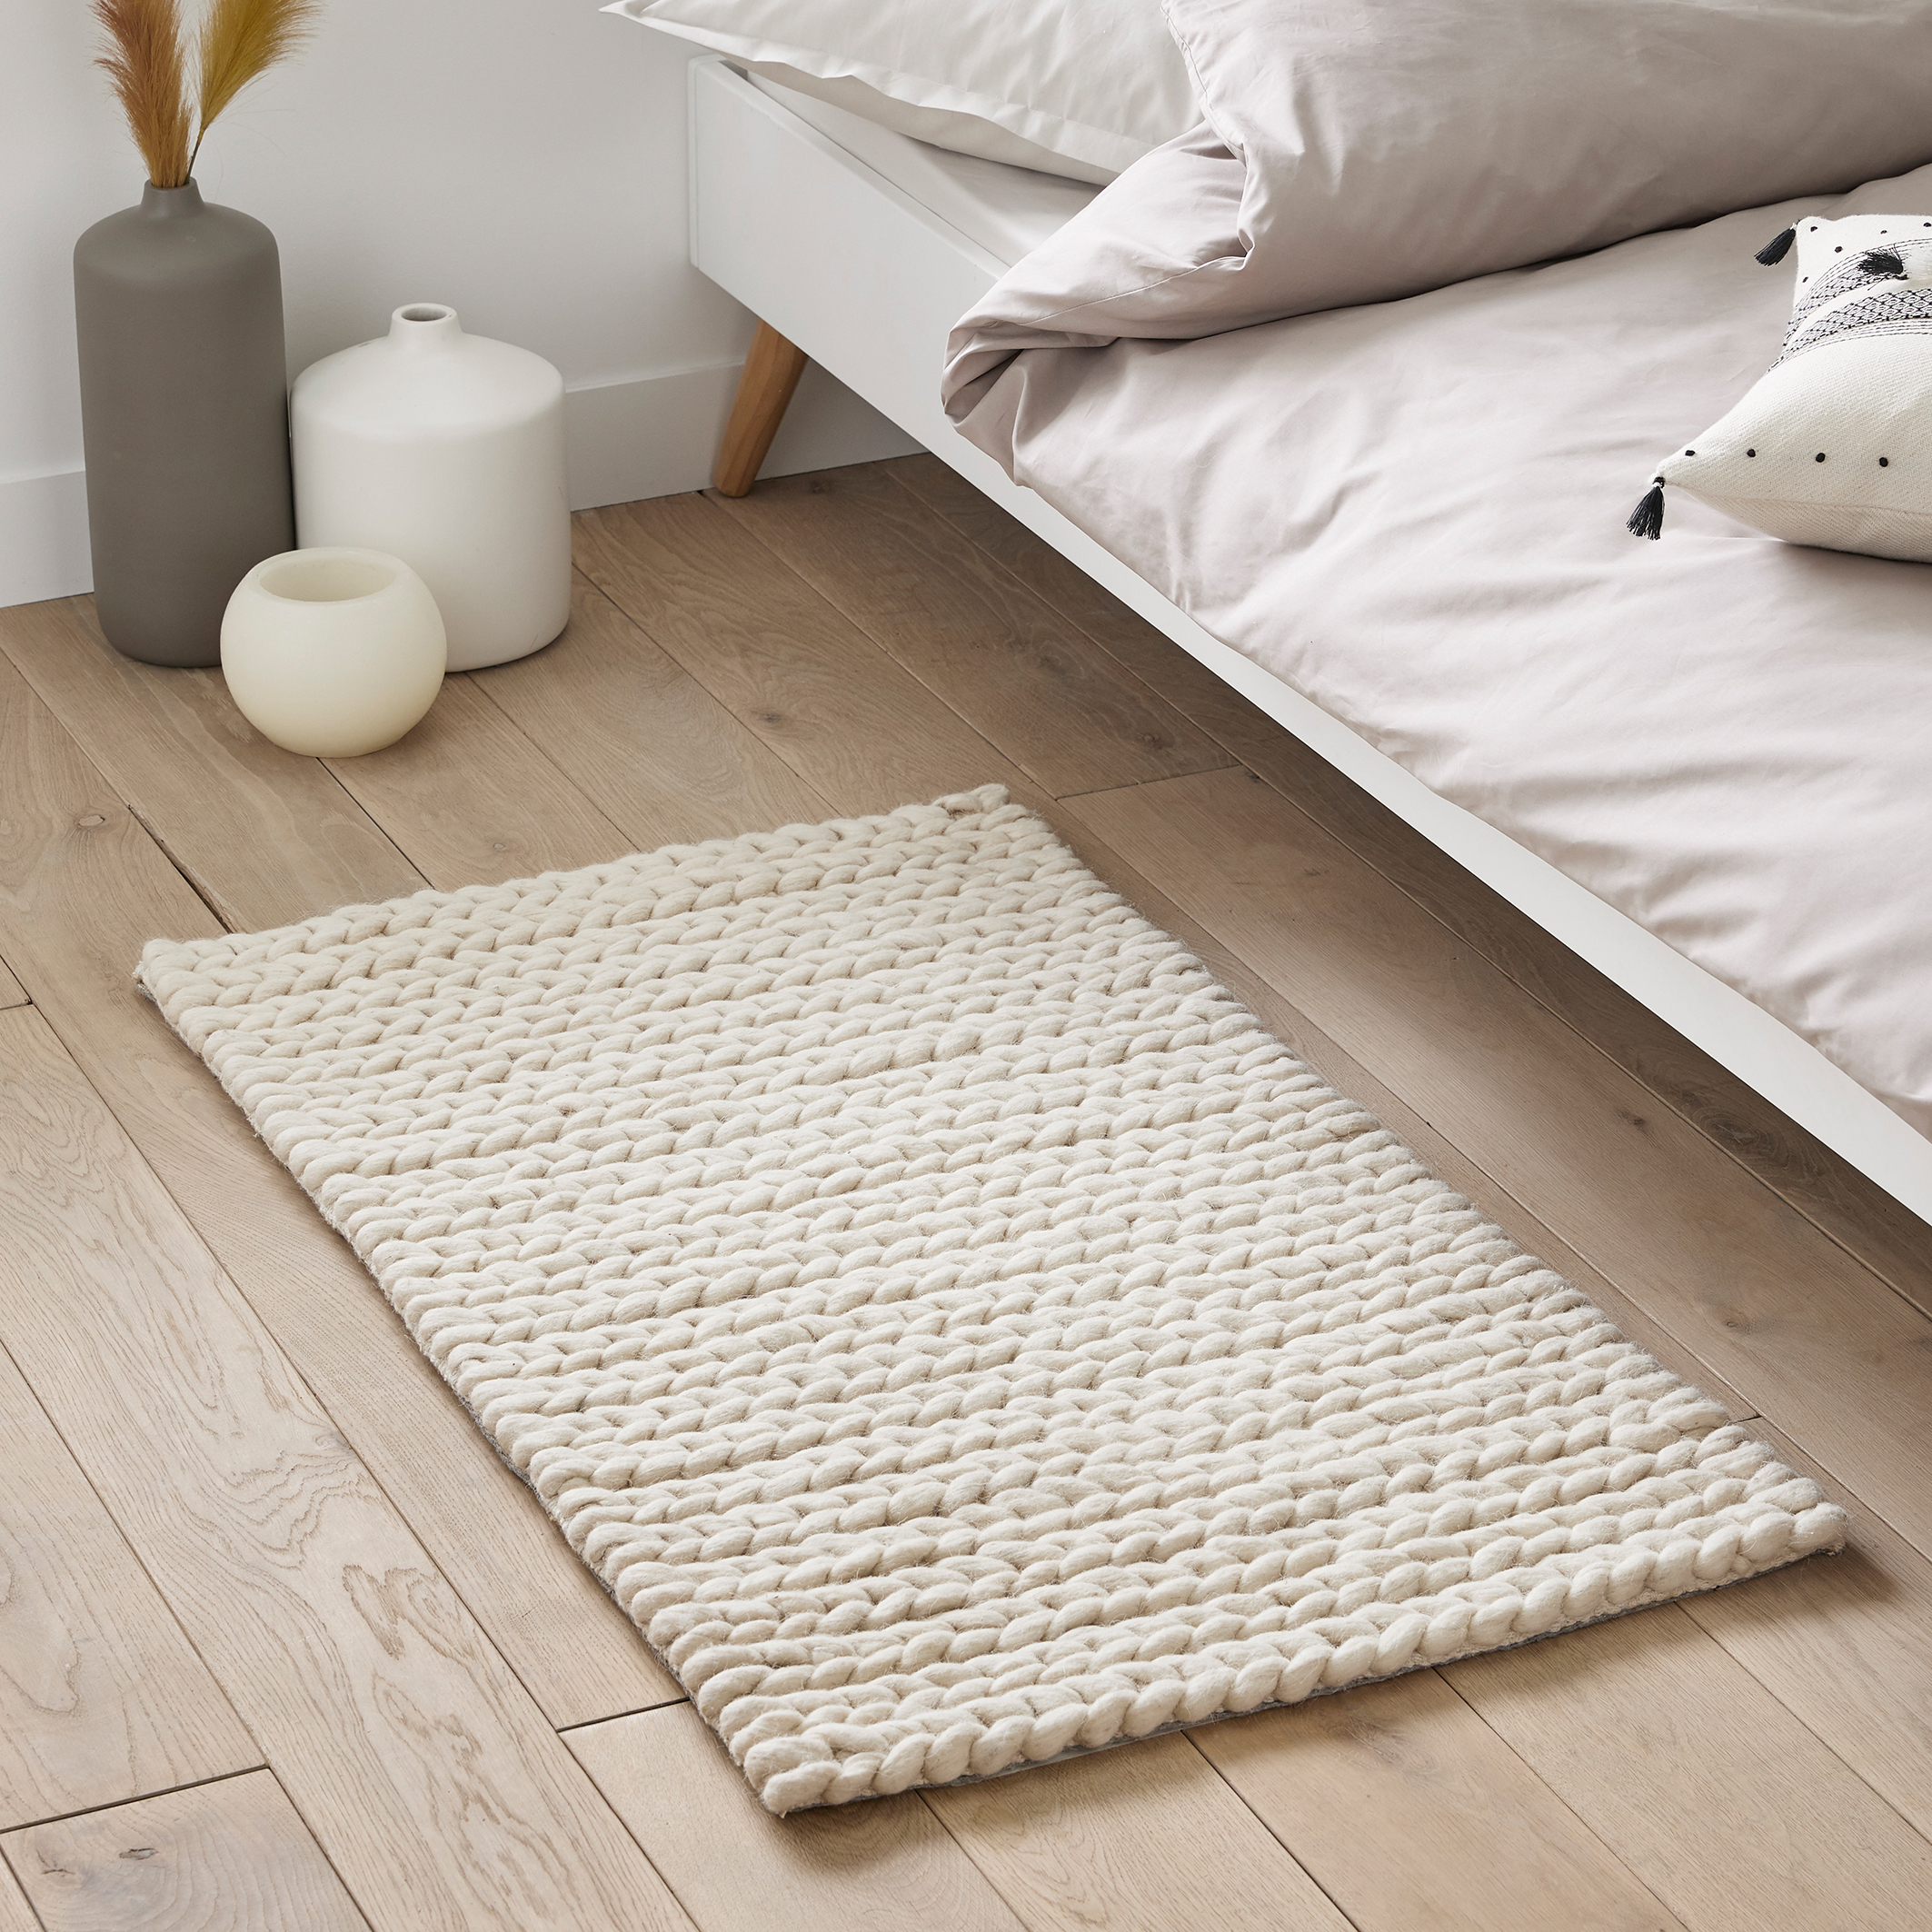 Diano Wool Knit Effect Bedside Rug La, How Big Is A 5×5 Round Rug